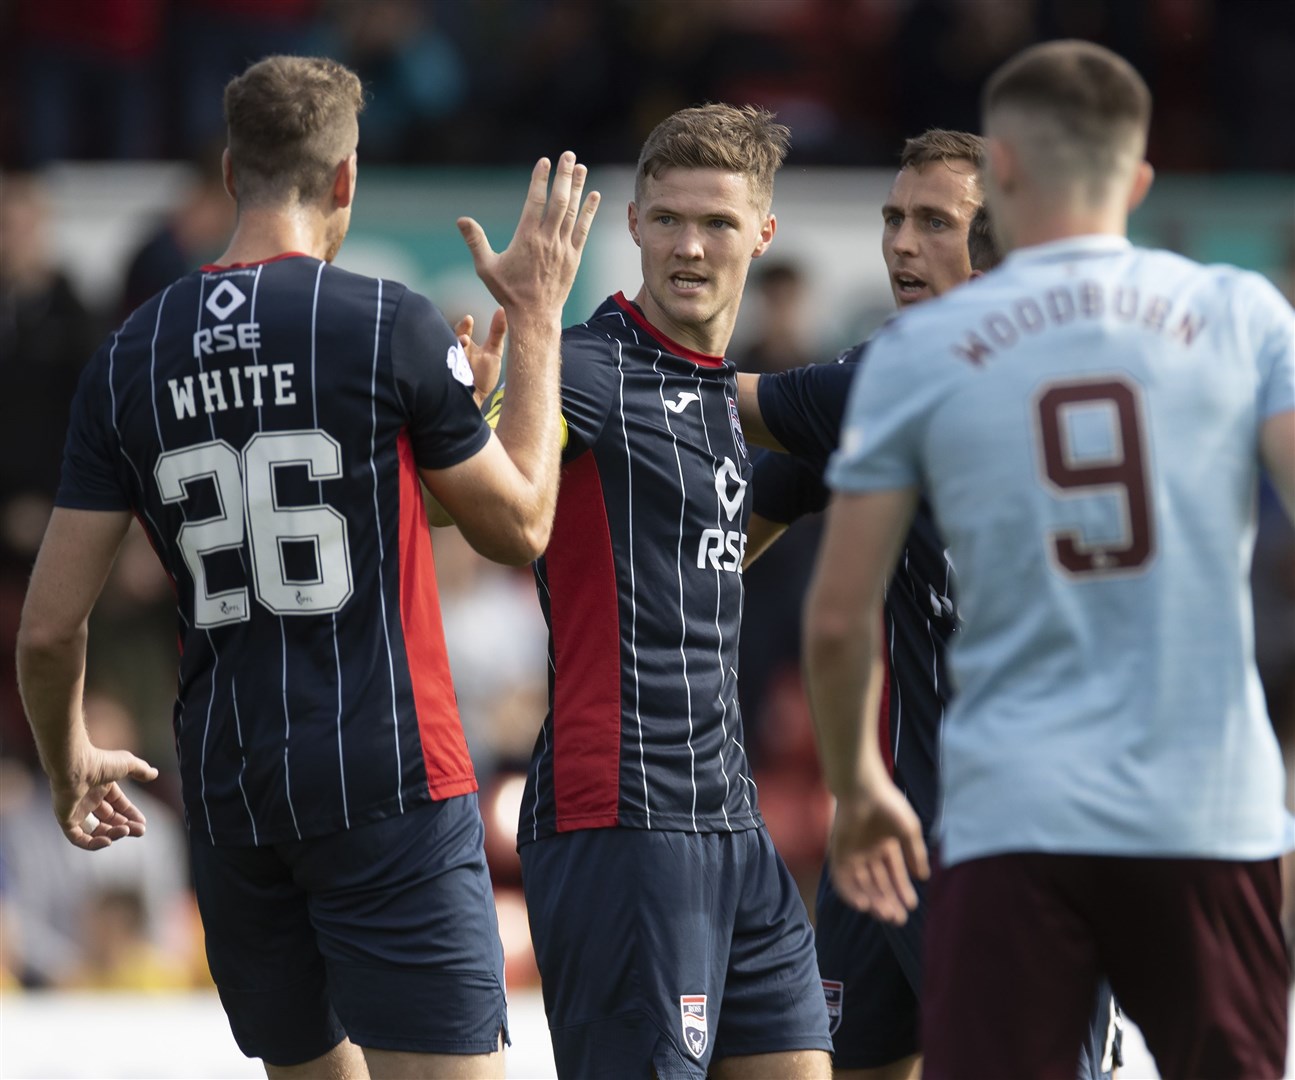 Ross County have their own set-piece specialist in Blair Spittal, who scored twice against Hearts. Picture: Ken Macpherson